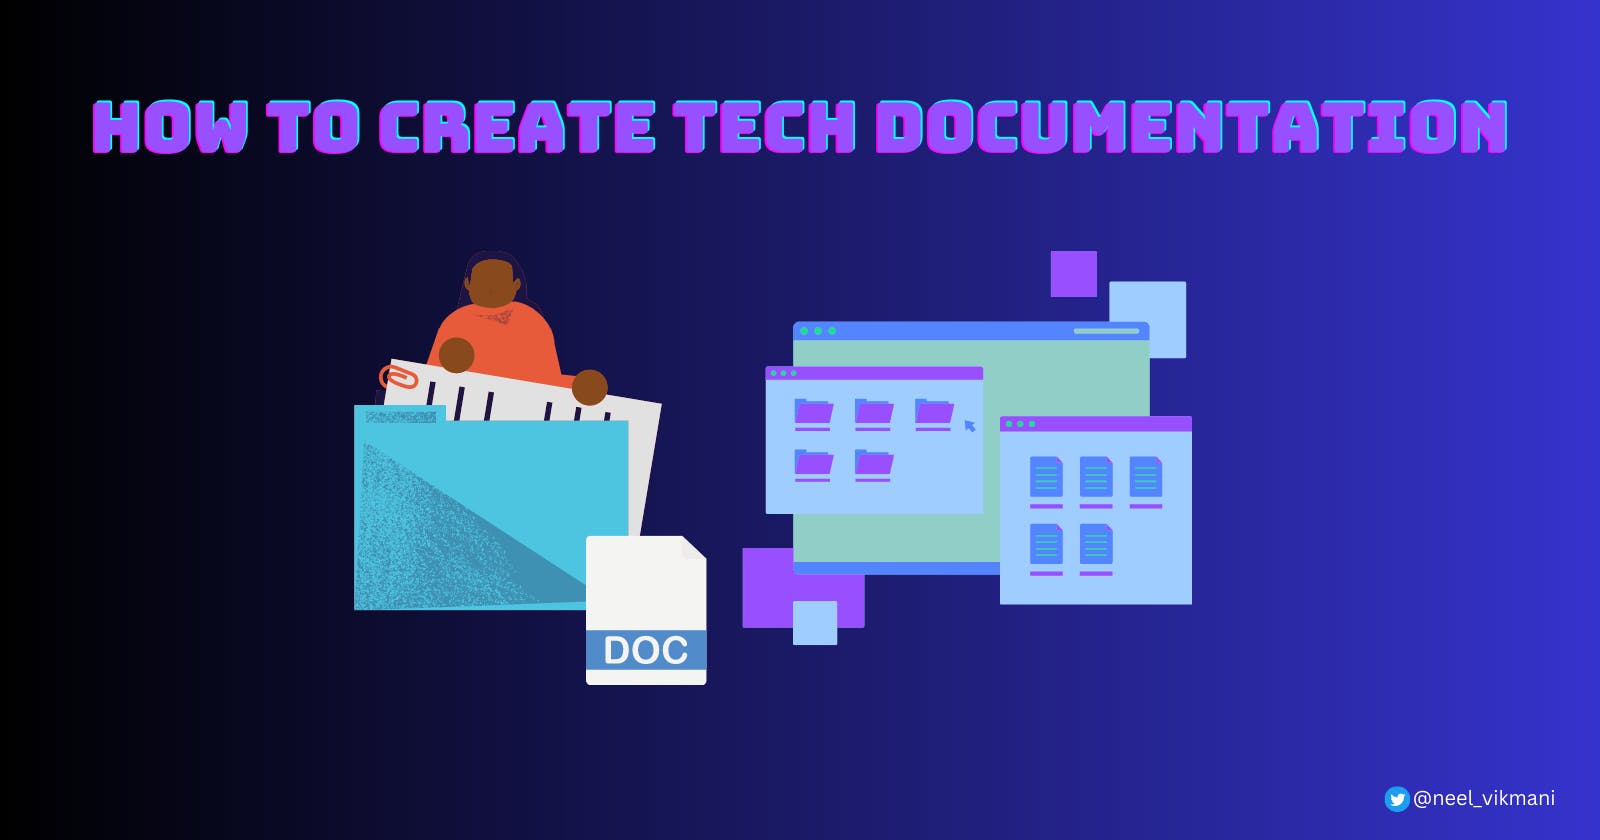 How to create effective tech documentations